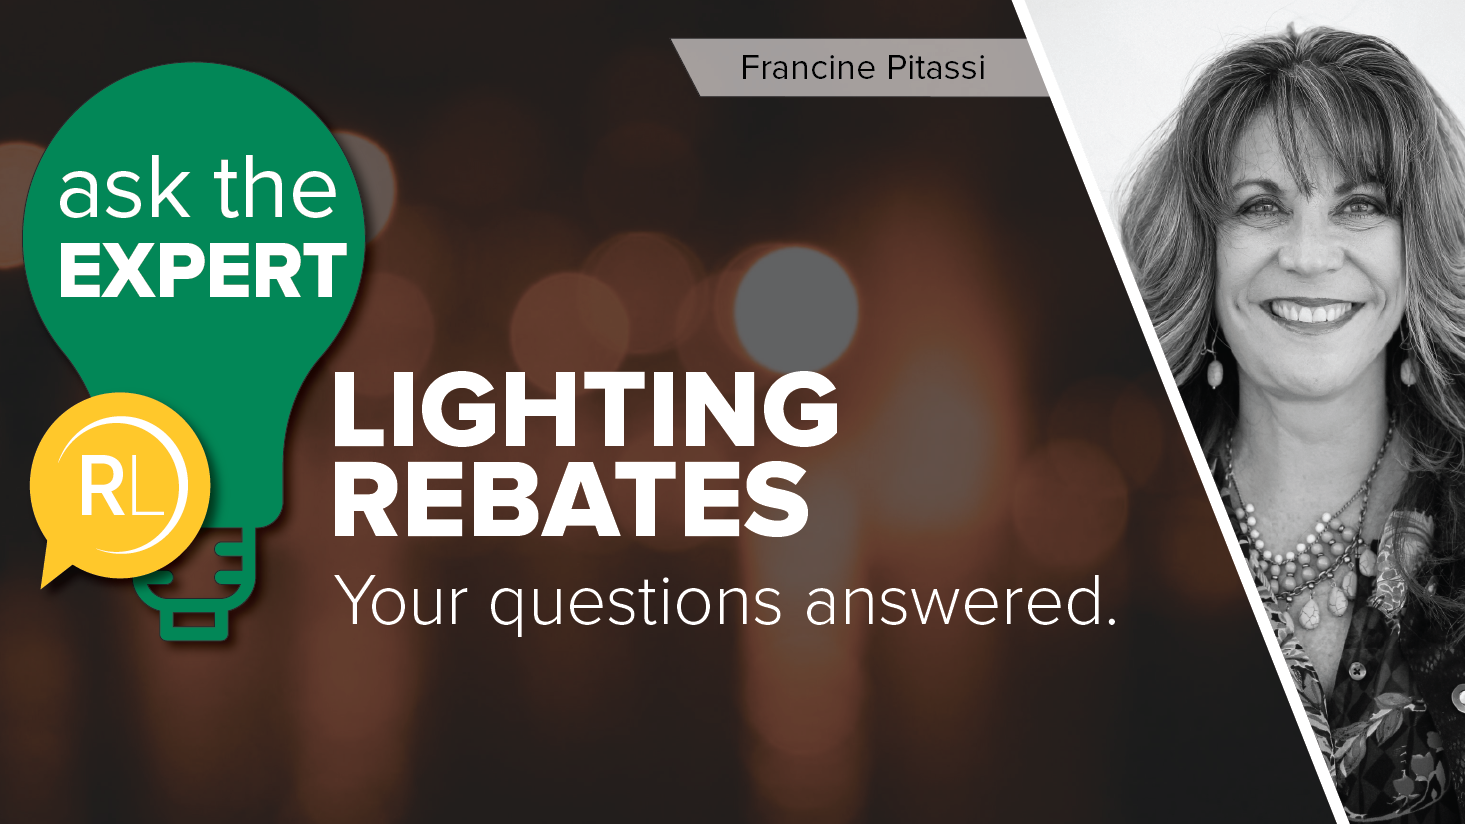 Answering your questions on lighting rebates [Ask the expert series]